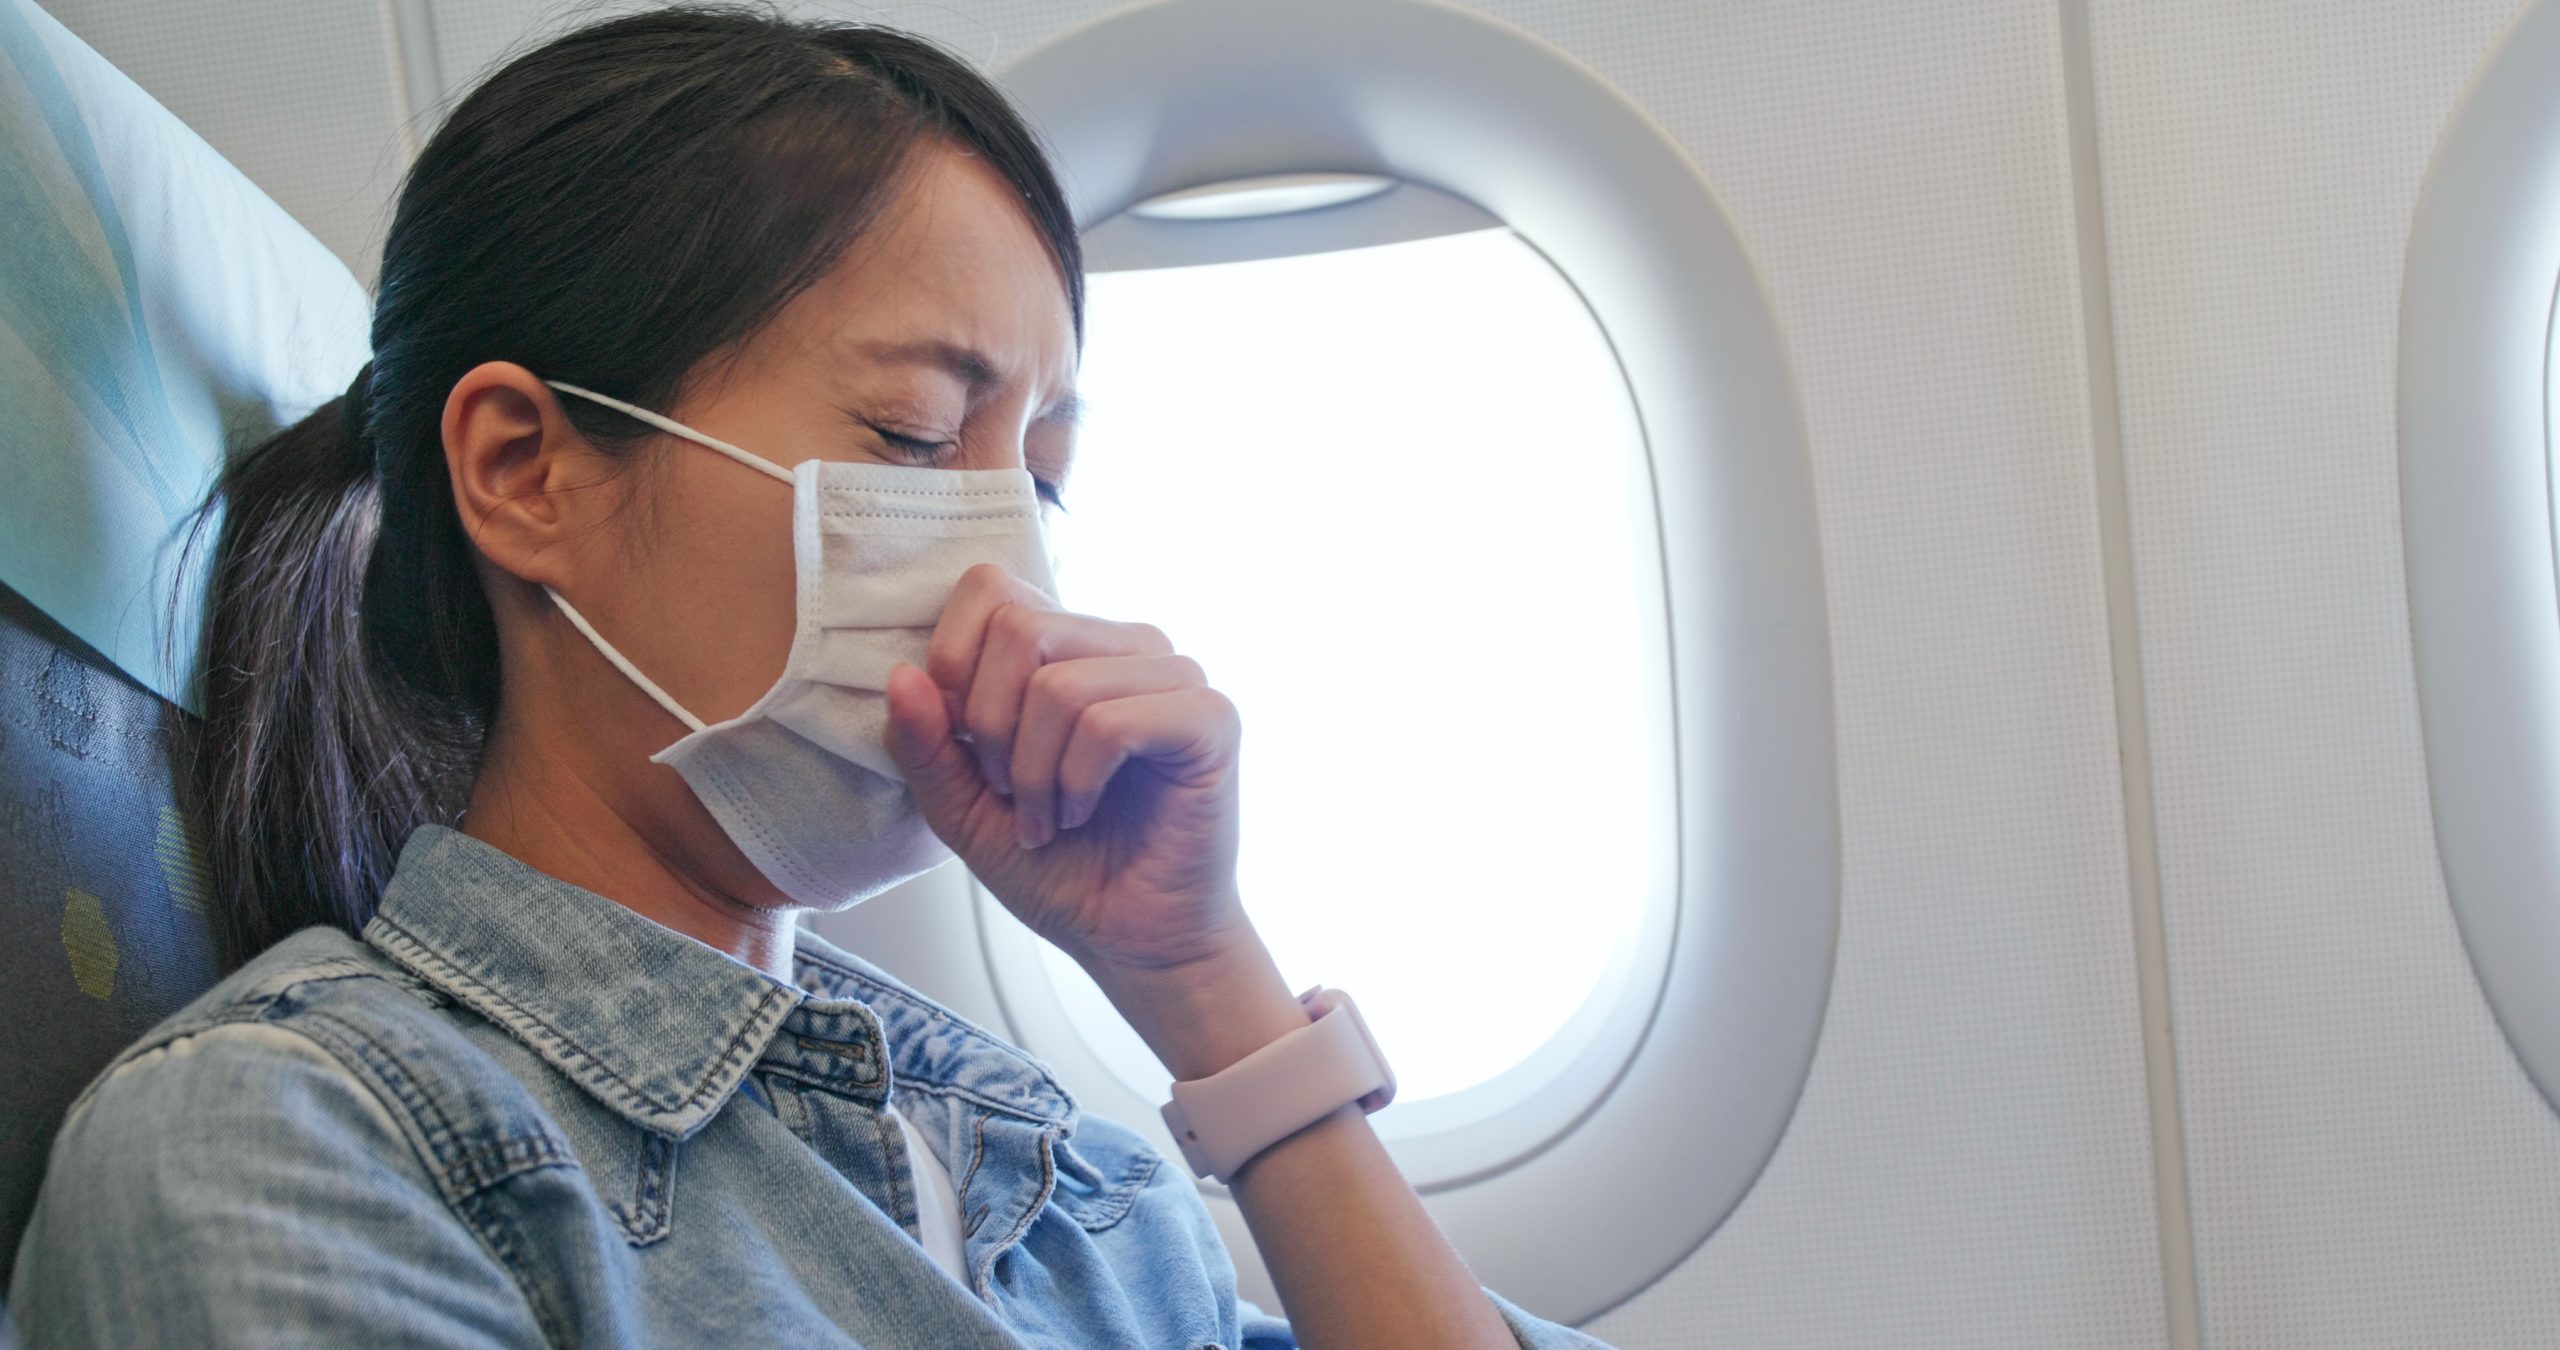 Centers for Disease Control: No rule for masks on planes